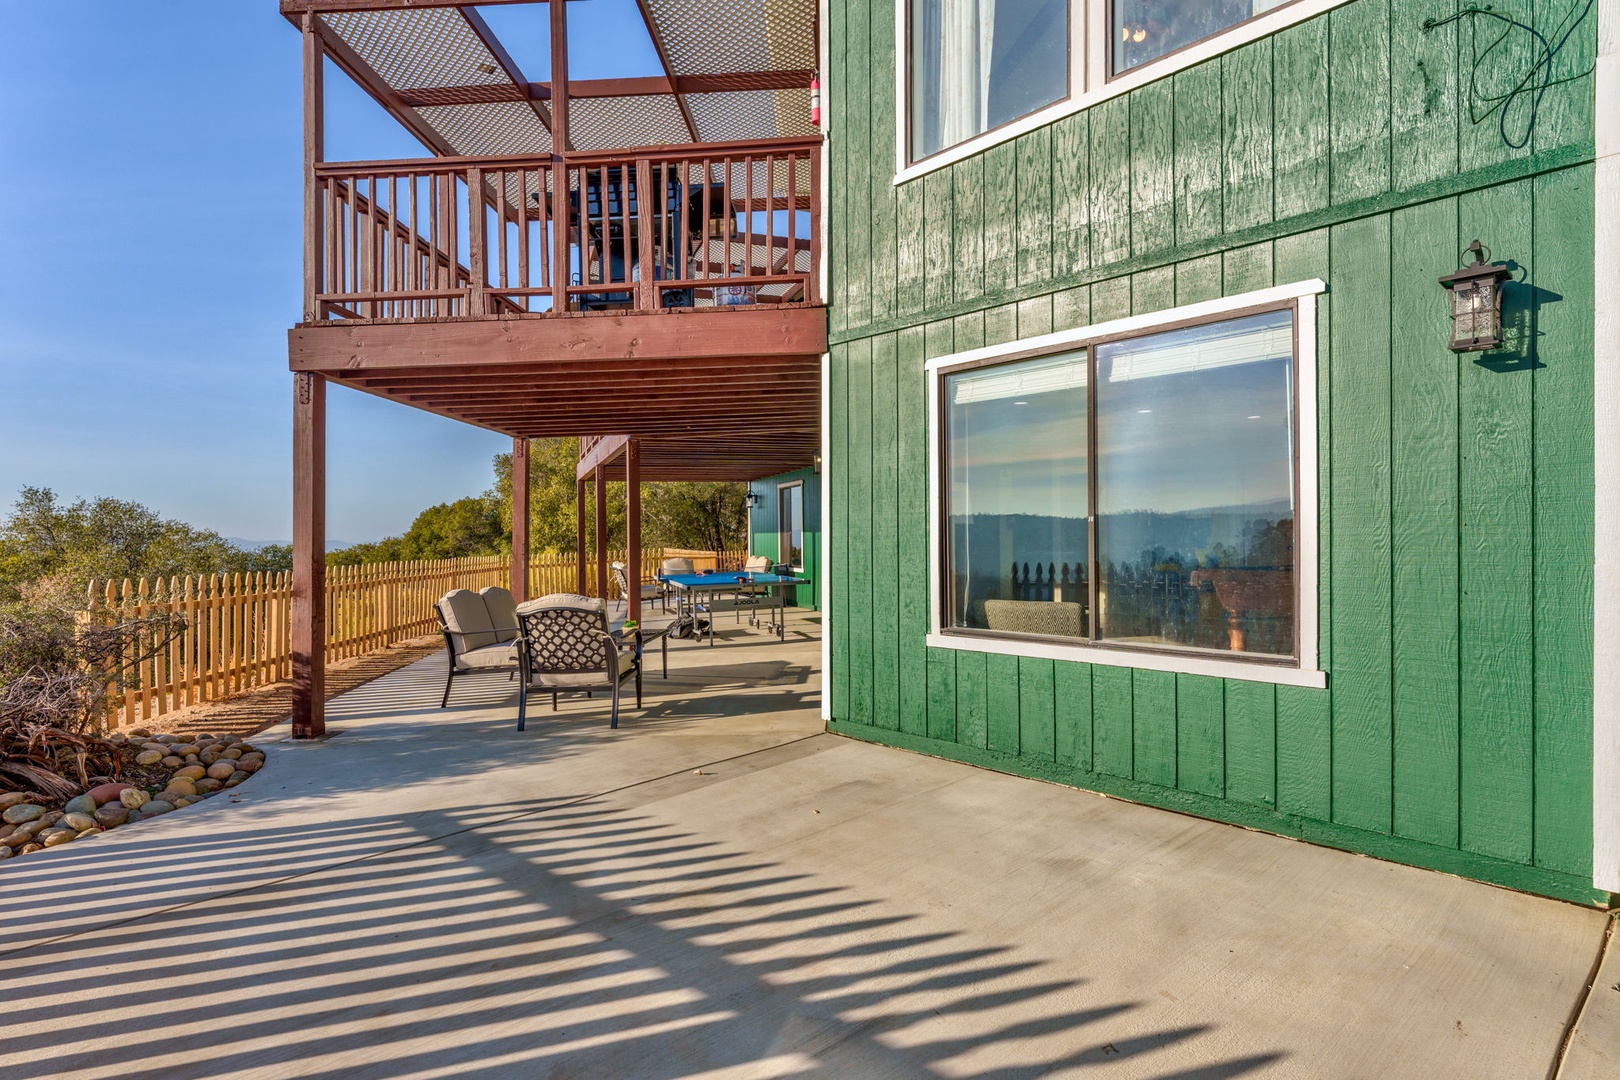 The lower level of the Back Deck offers even more outdoor lounge and gaming space